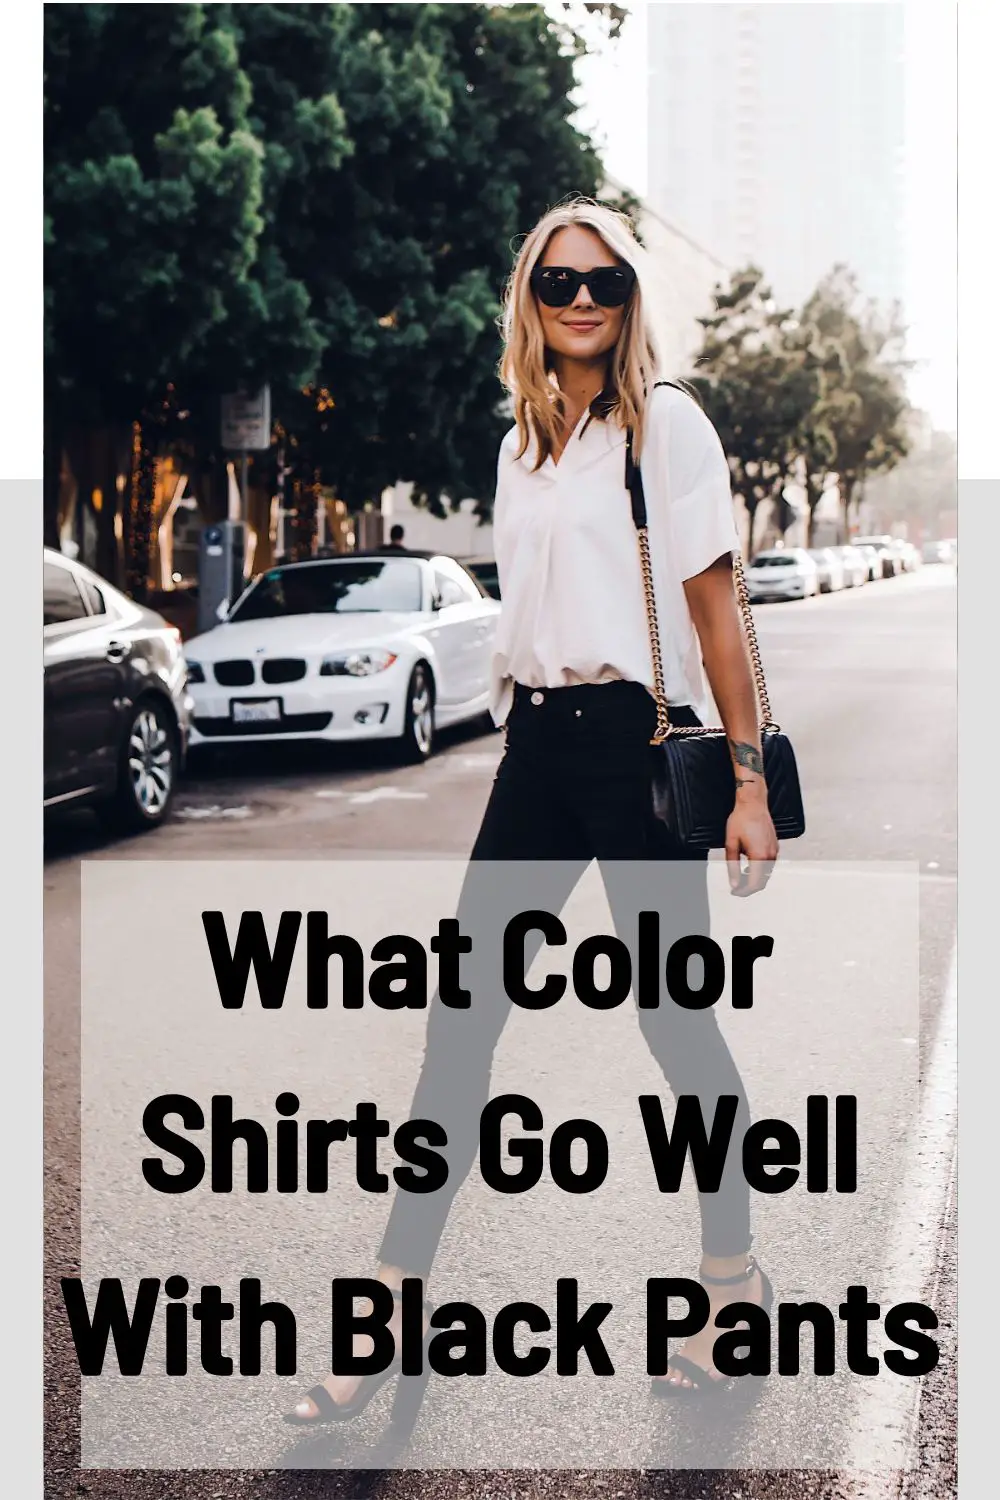 What Color Shirts Go Well With Black Pants